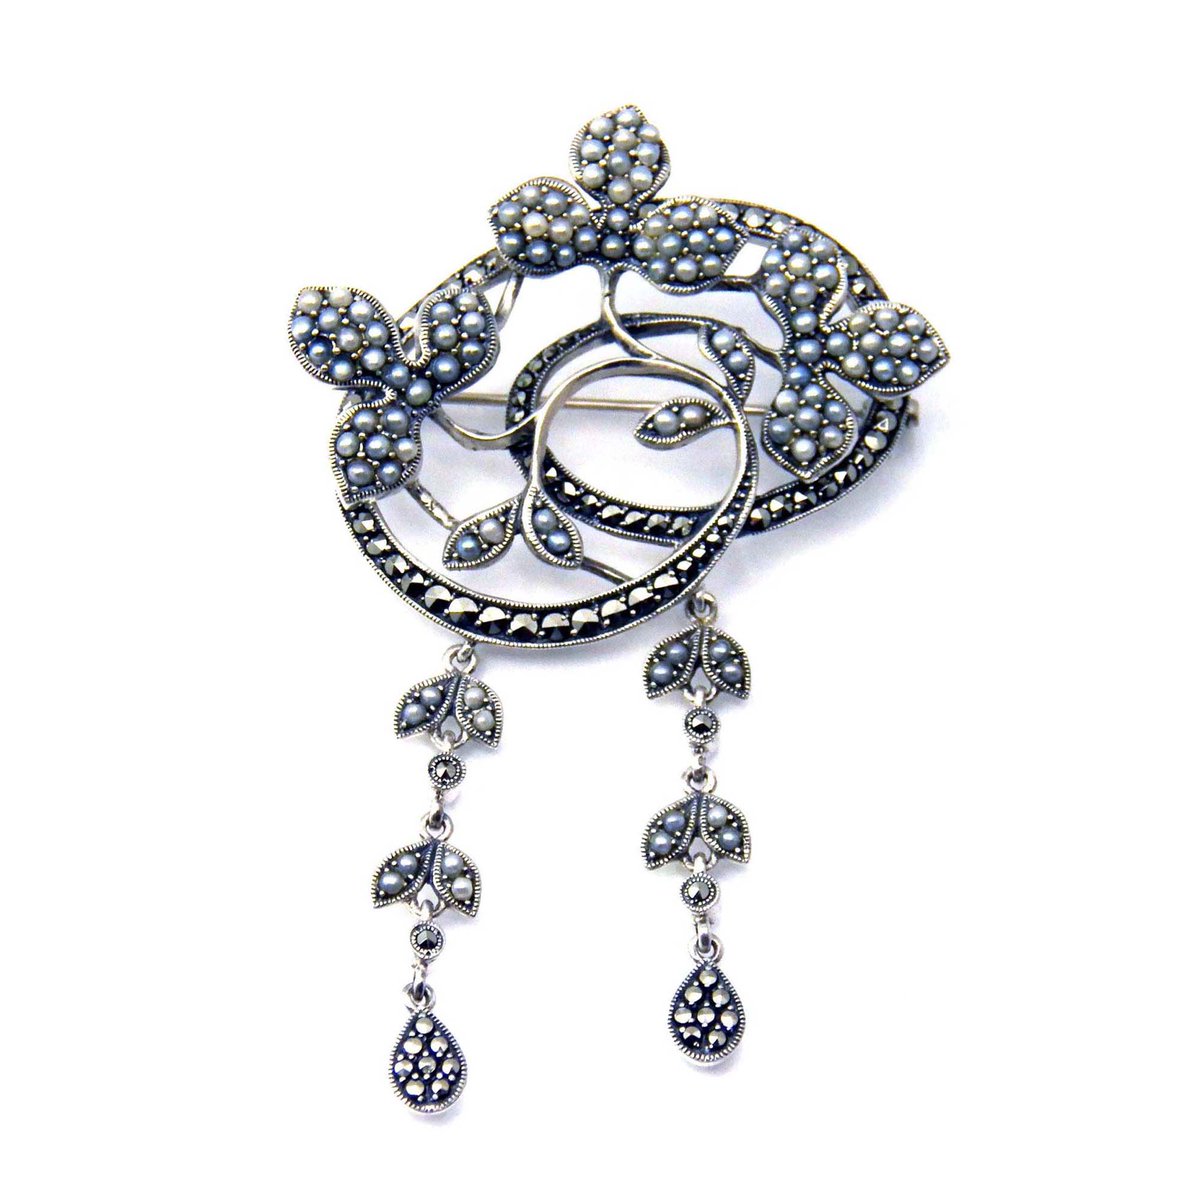 sochicfinds.com/products/marca…
Marcasite and Seed Pearl Brooch, Sterling Silver Pin, Victorian Revival Jewelry #MarcasiteBrooch #SeedPearlBrooch, #SterlingSilverPin, #VictorianRevivalJewelry